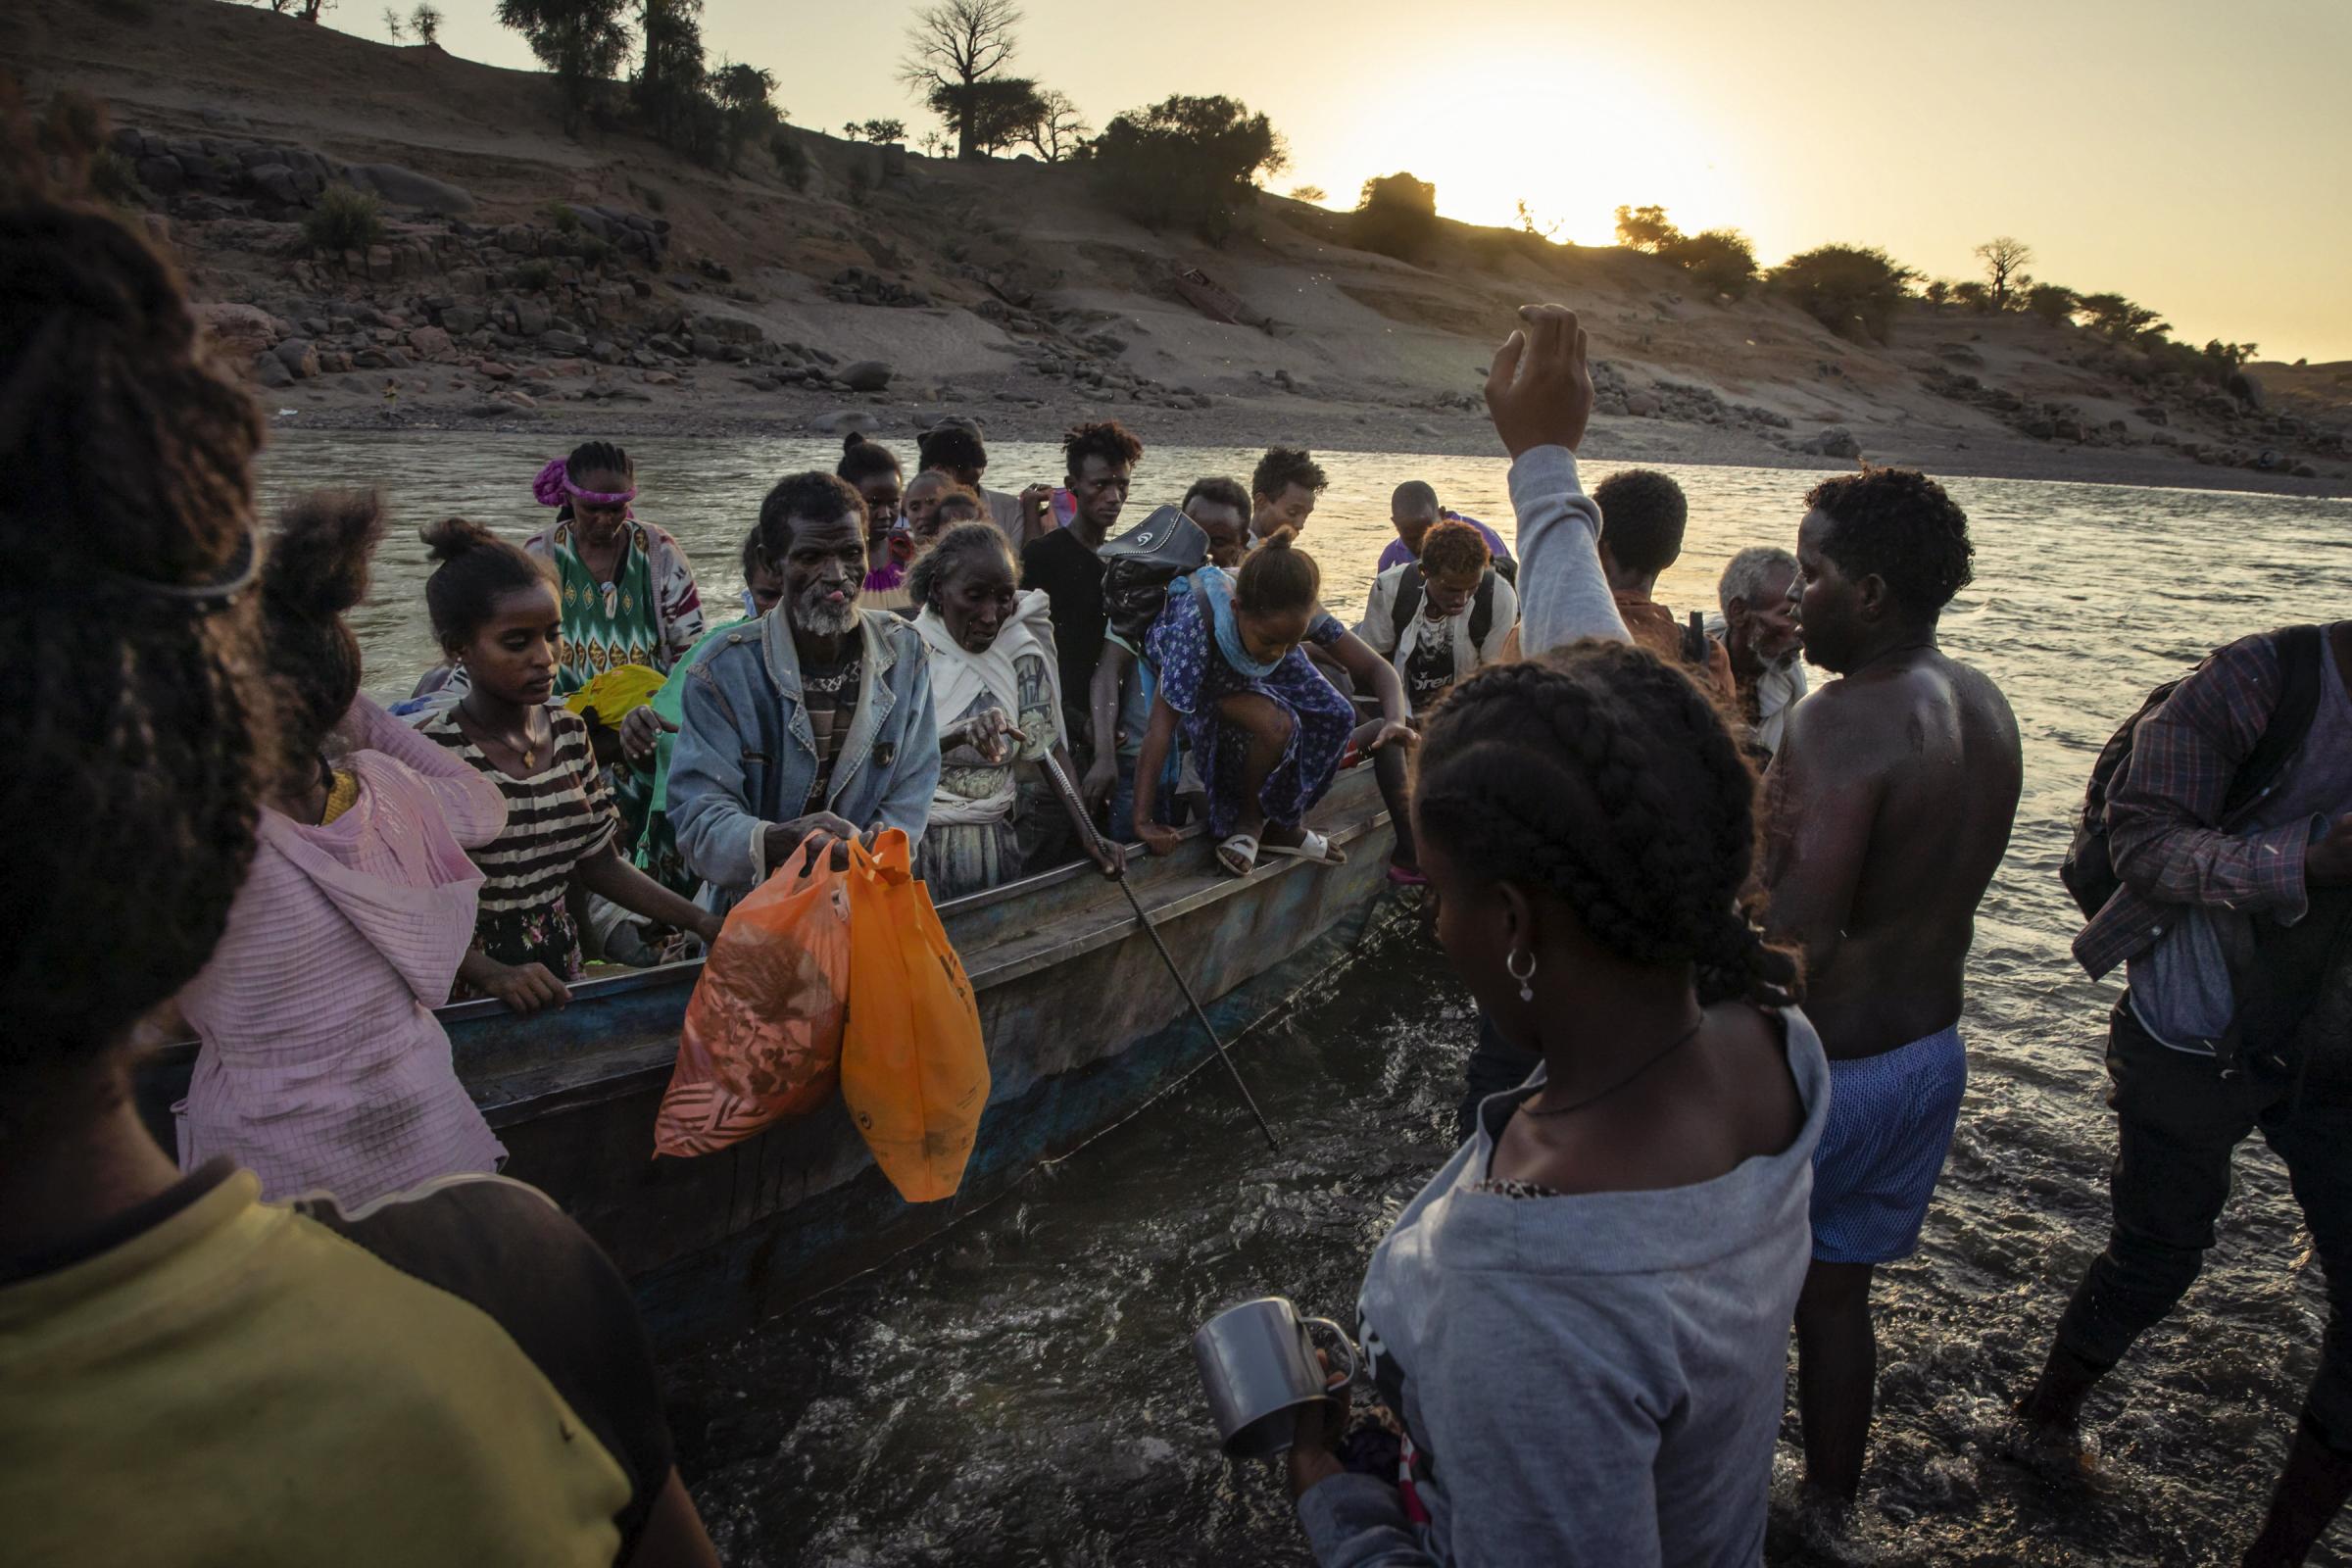 War forces thousands of Tigrayan's into Sudan - Tigrayan refugees arrive on the banks of the Tekeze River.